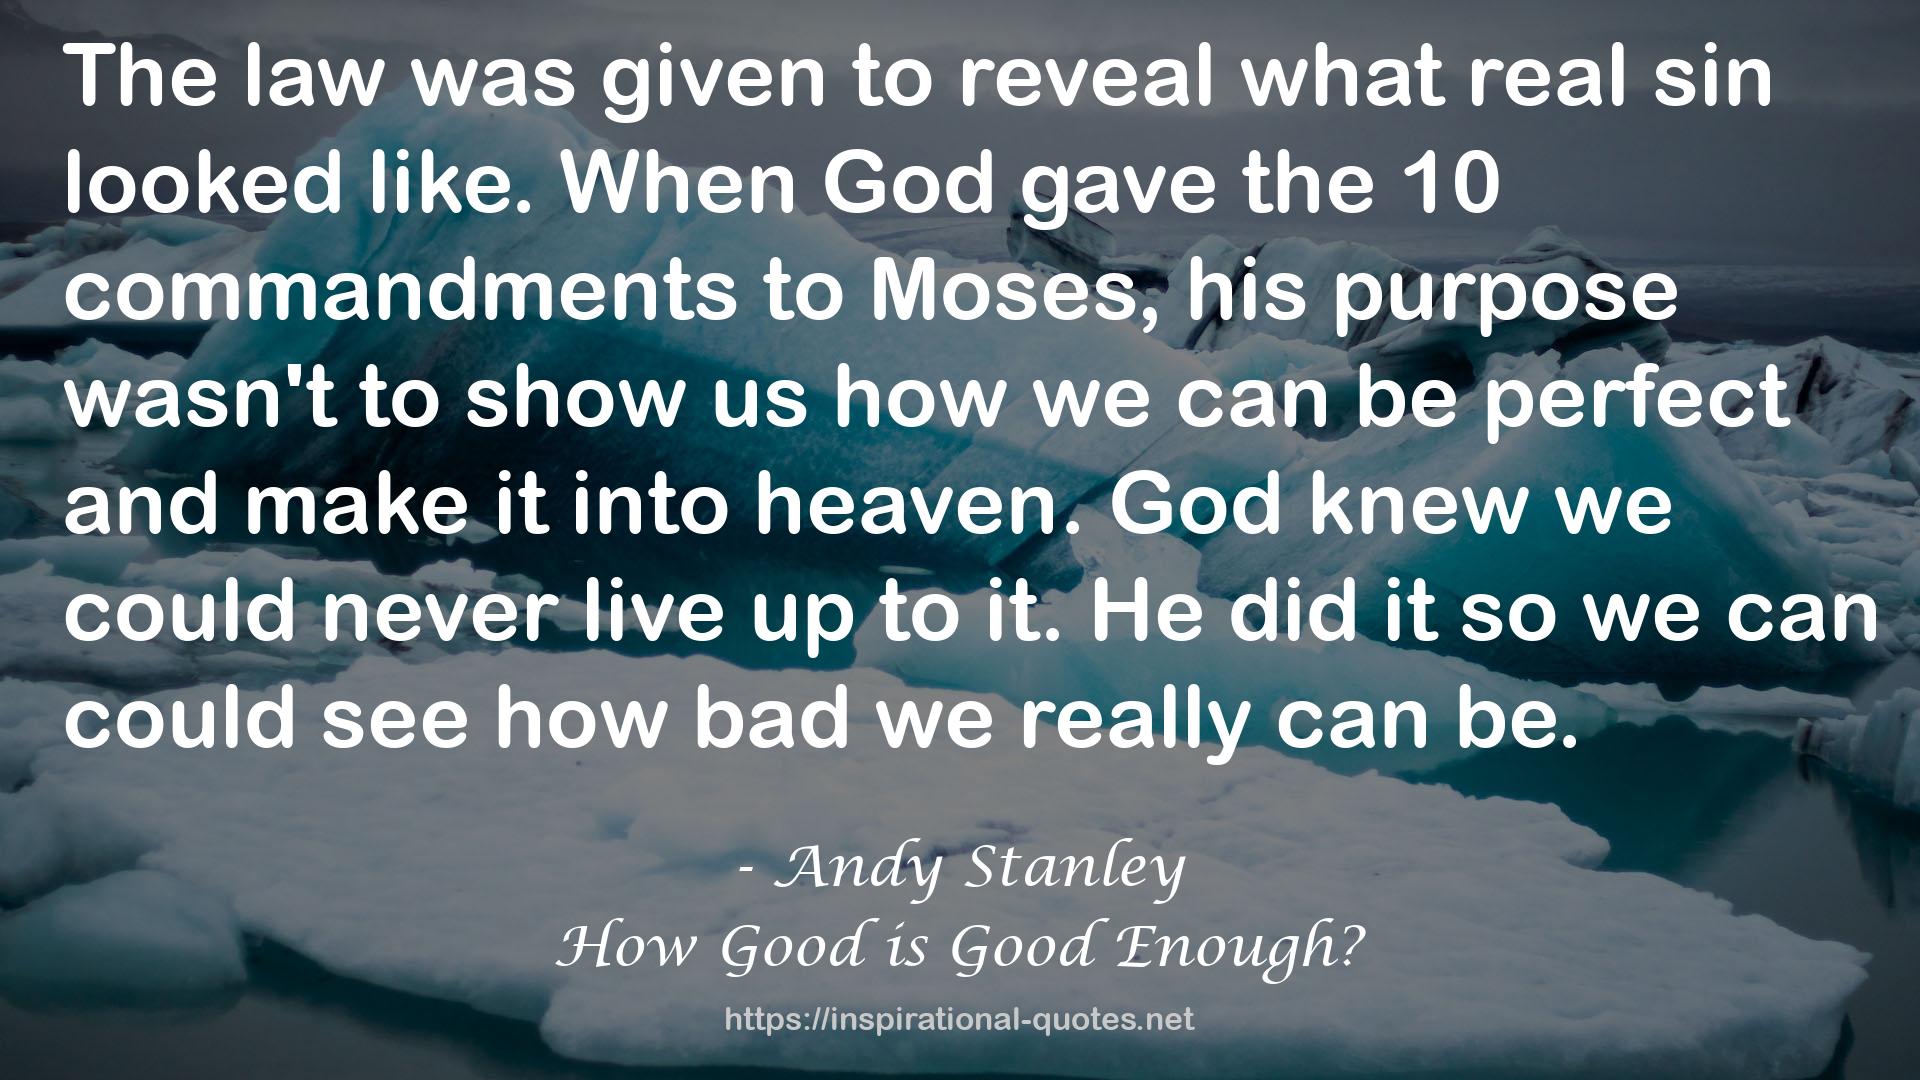 How Good is Good Enough? QUOTES